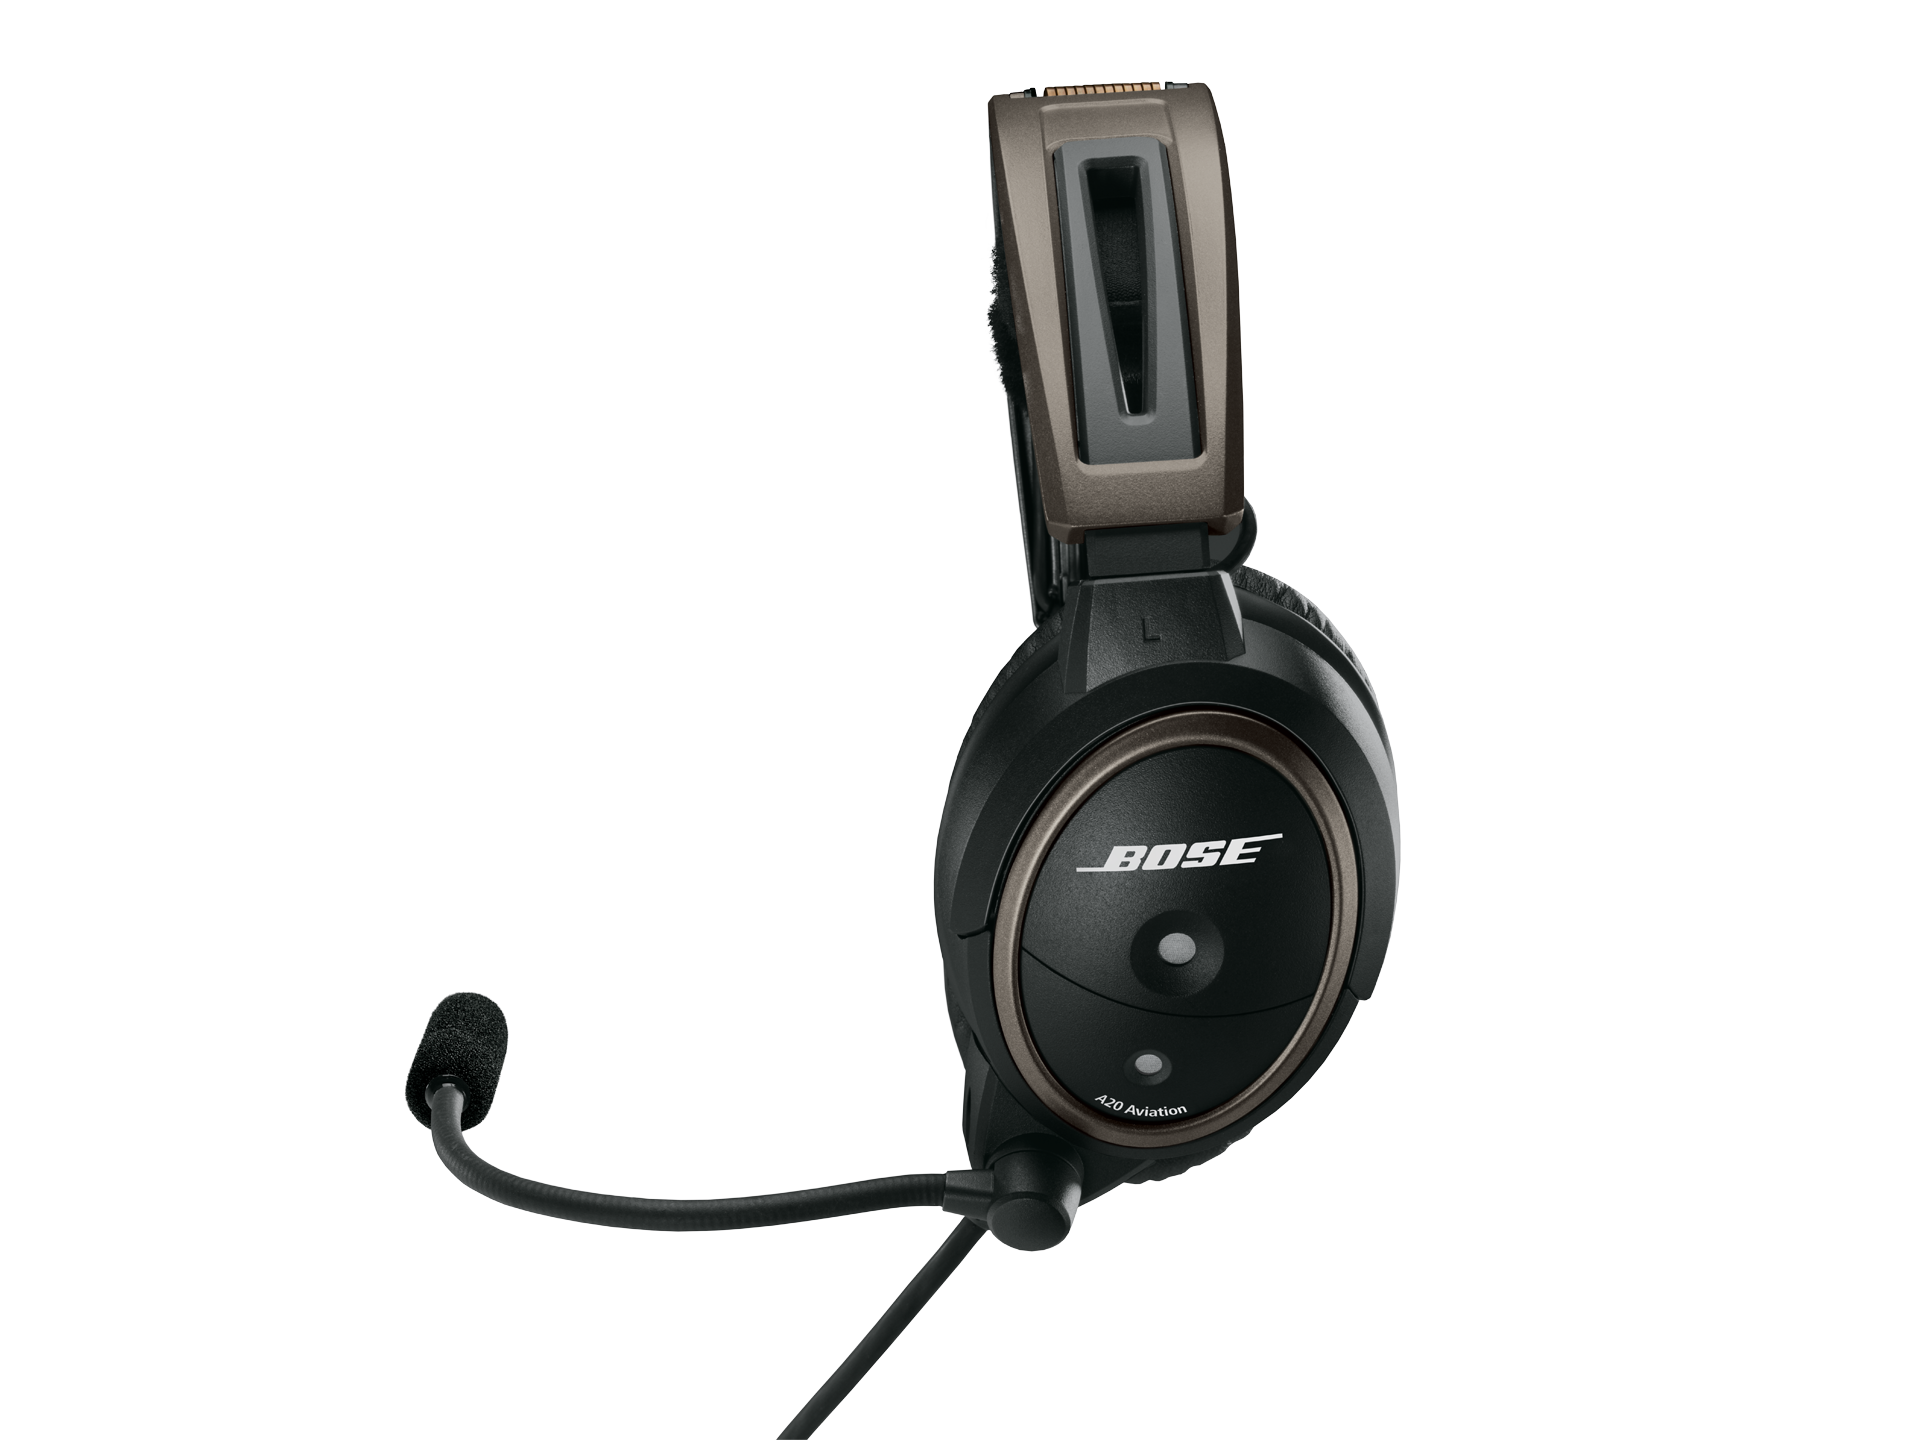 Bose A20 Helicopter Headset with U174 Plug, Bluetooth, Battery Powered, Straight Cable, Hi Imp. (324843-3030)